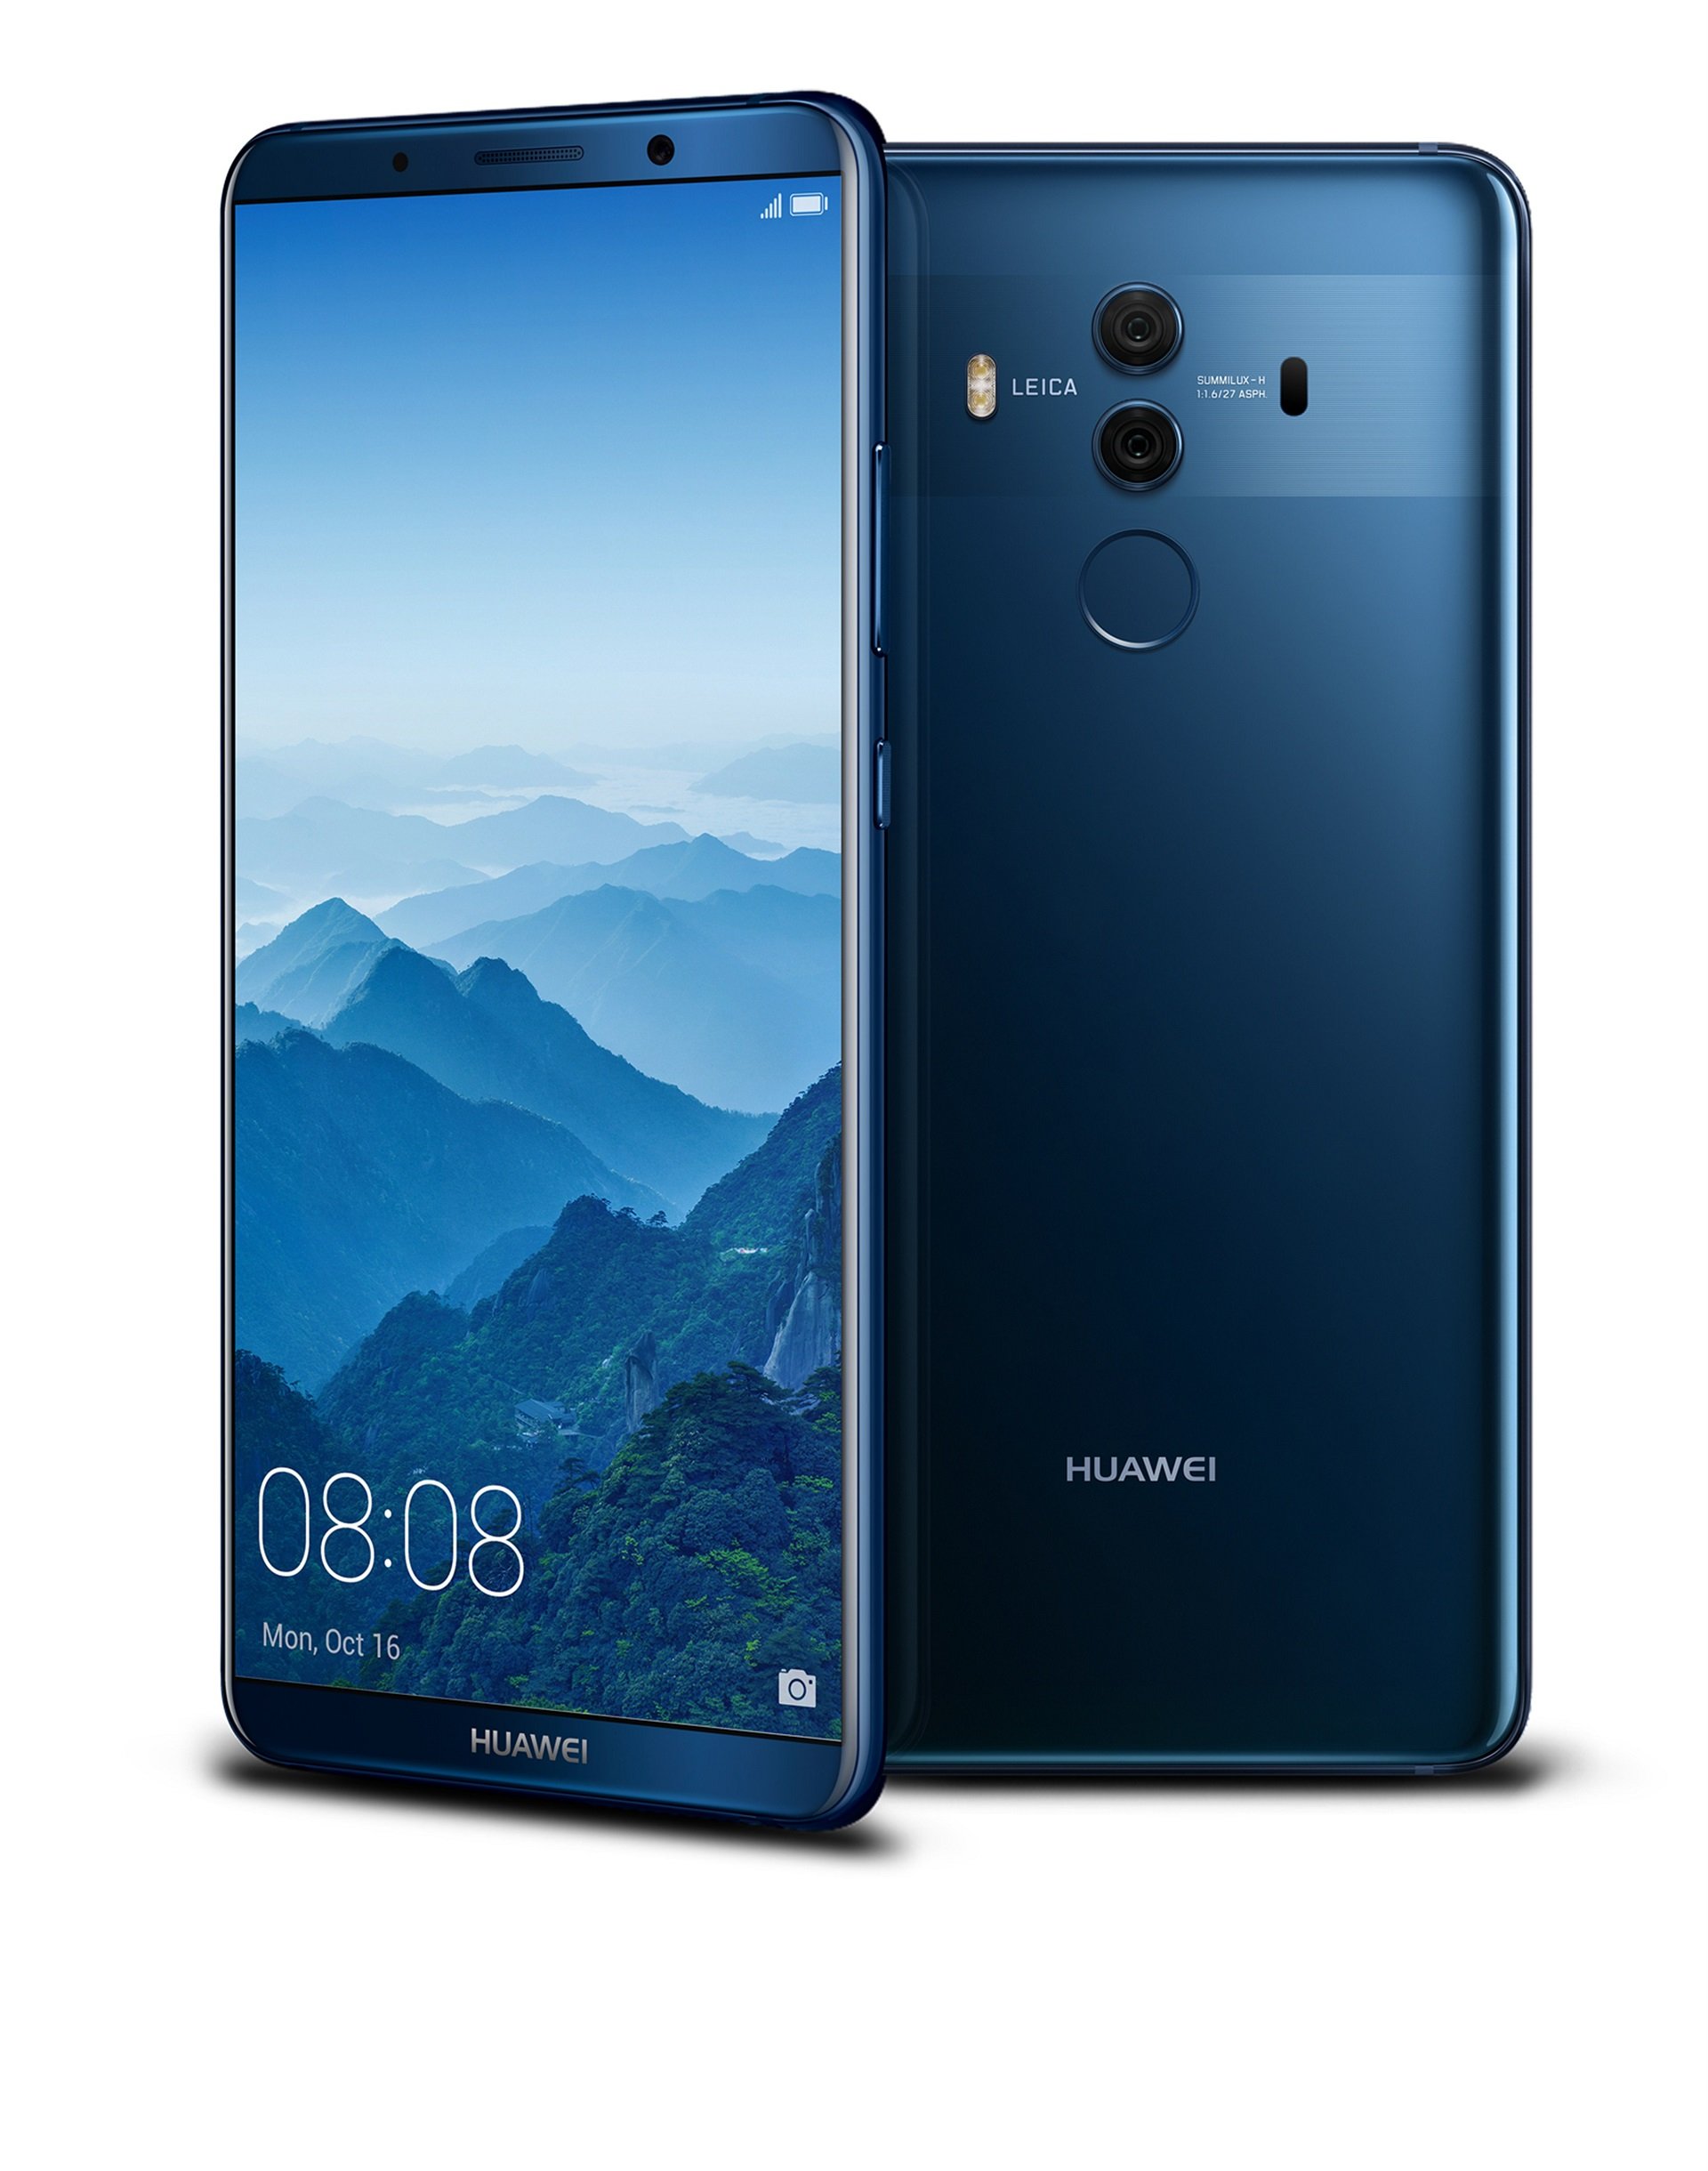 Huawei mate 10 lite pros and cons